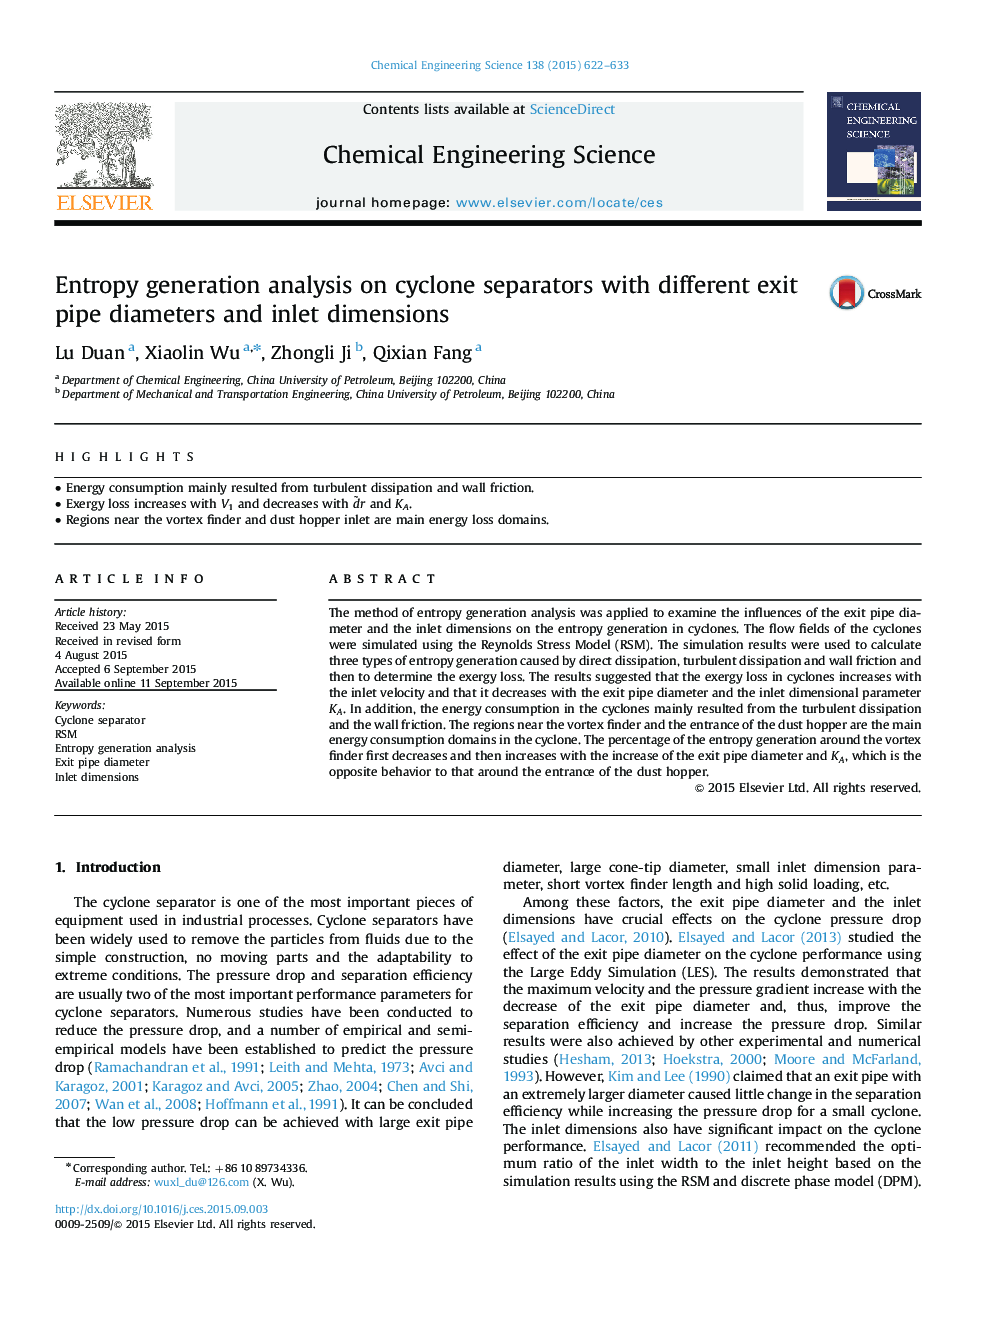 Entropy generation analysis on cyclone separators with different exit pipe diameters and inlet dimensions